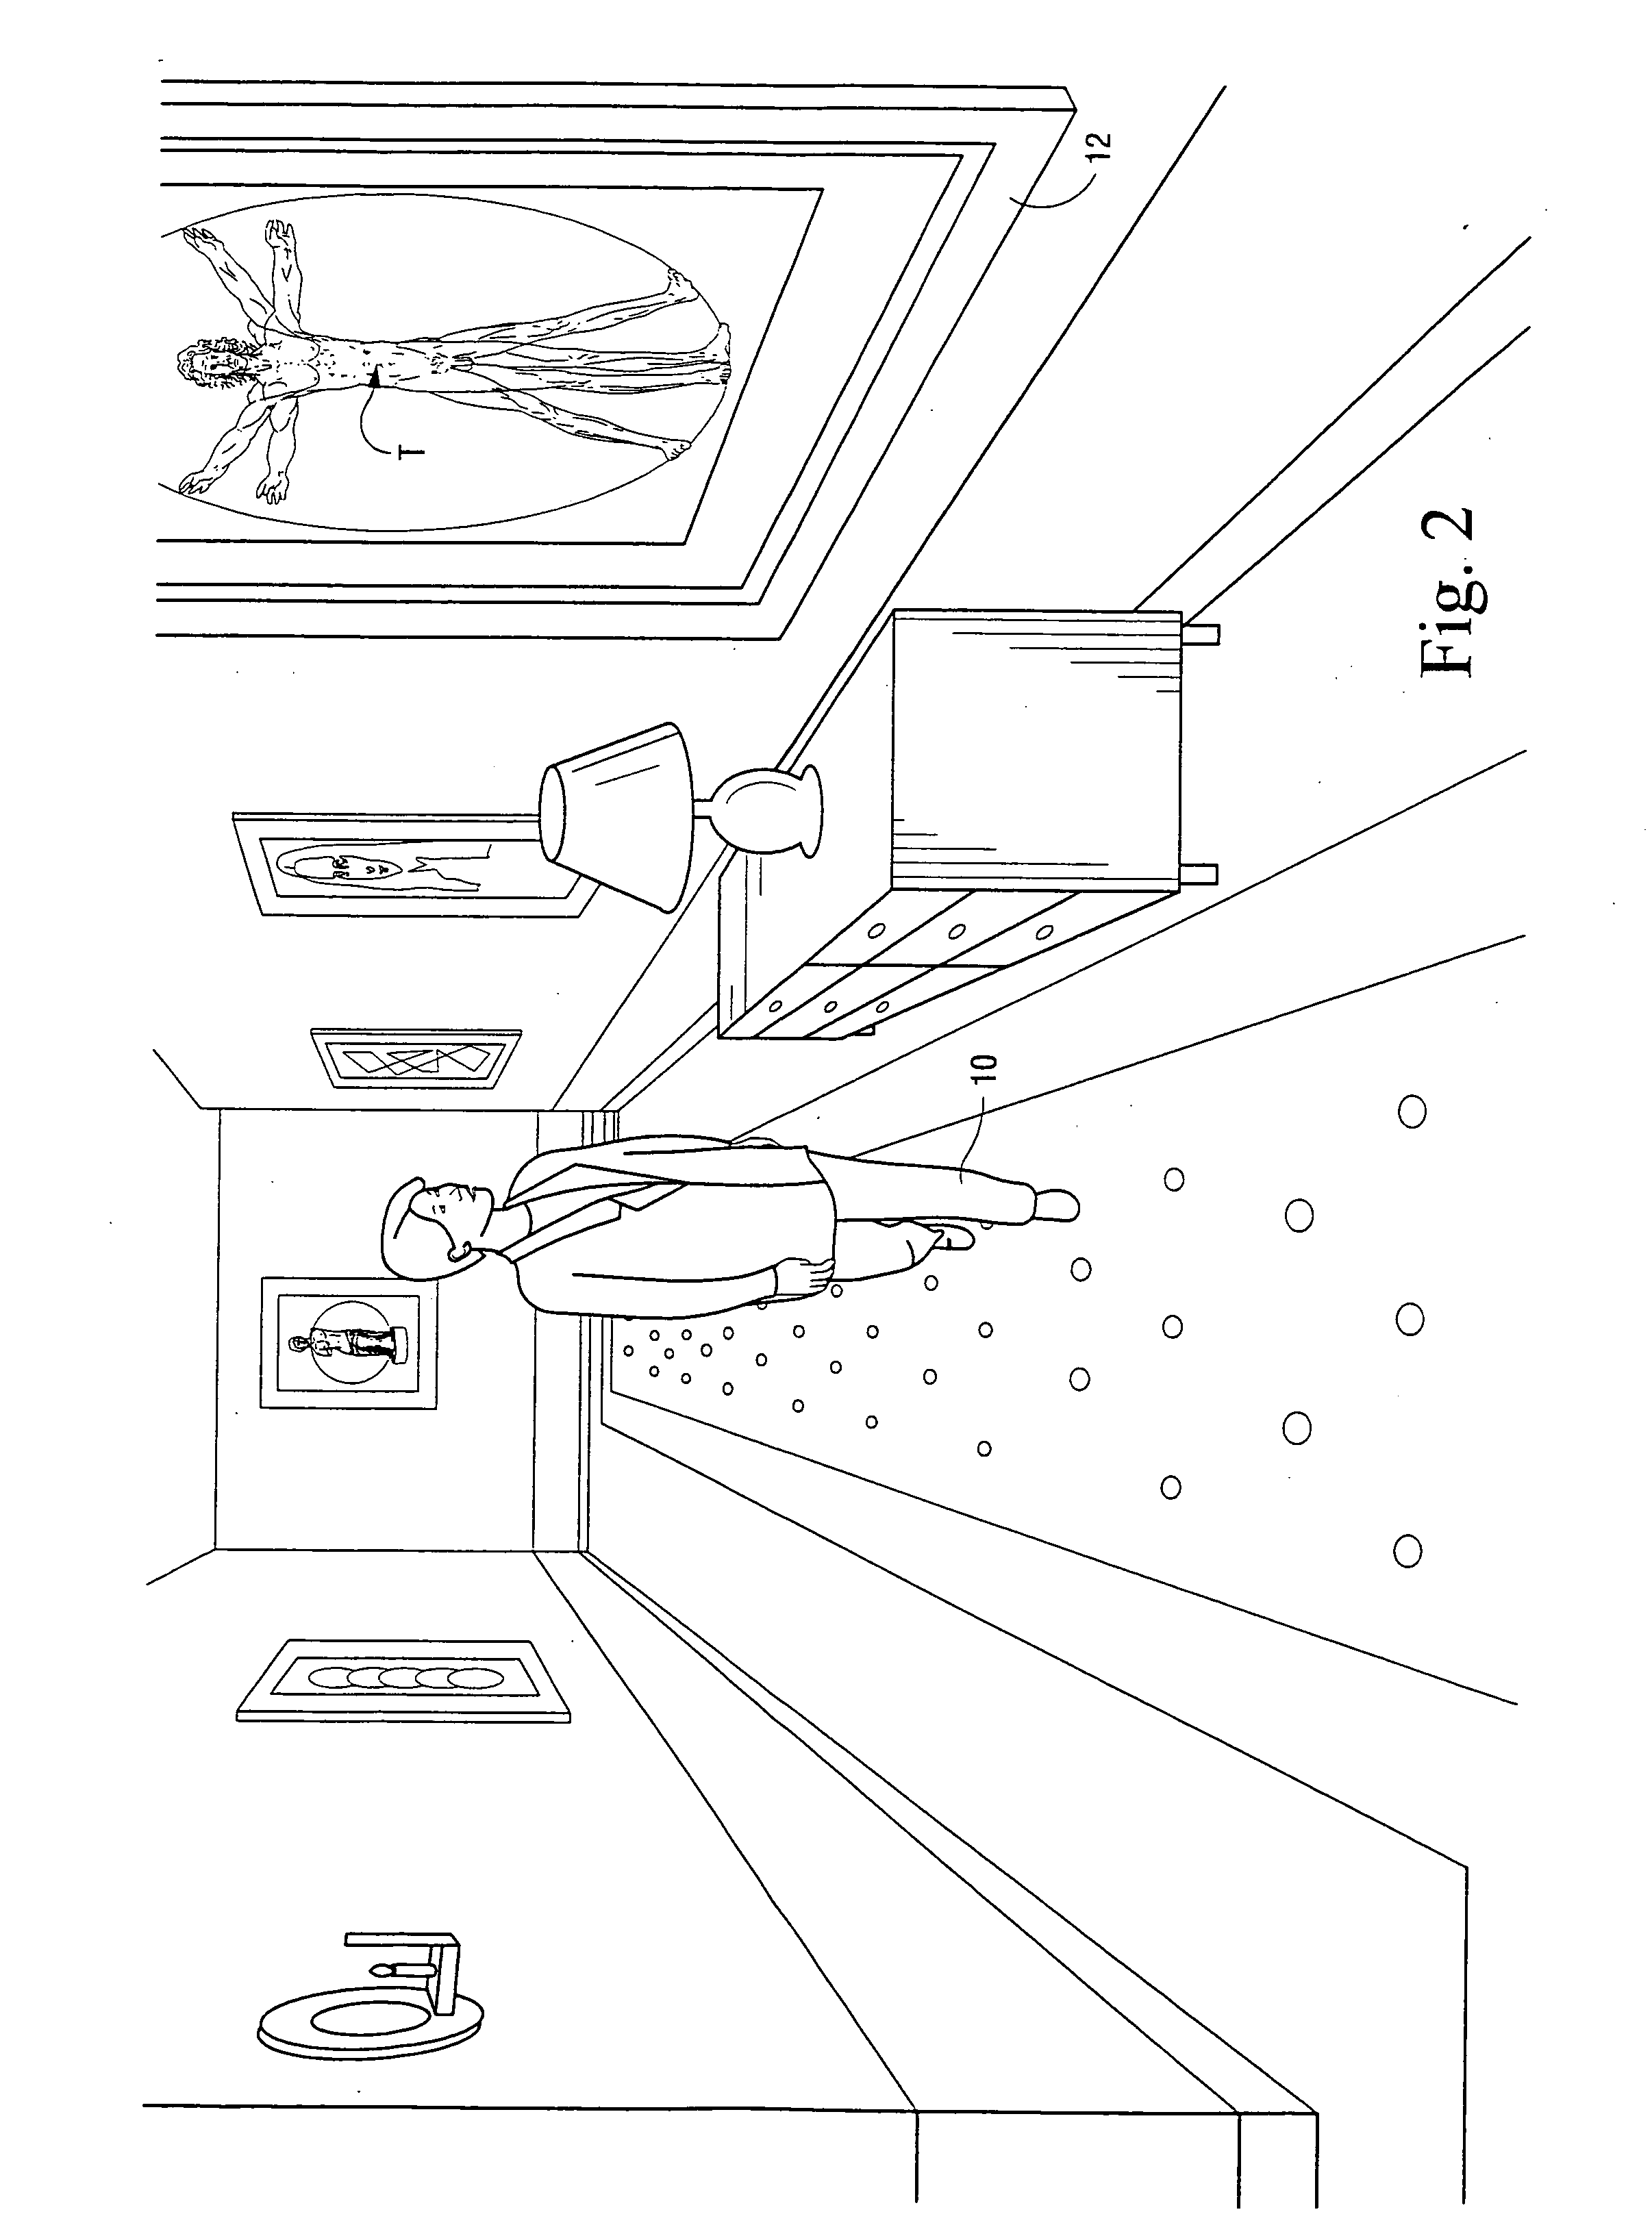 System and method for controlling animation by tagging objects within a game environment